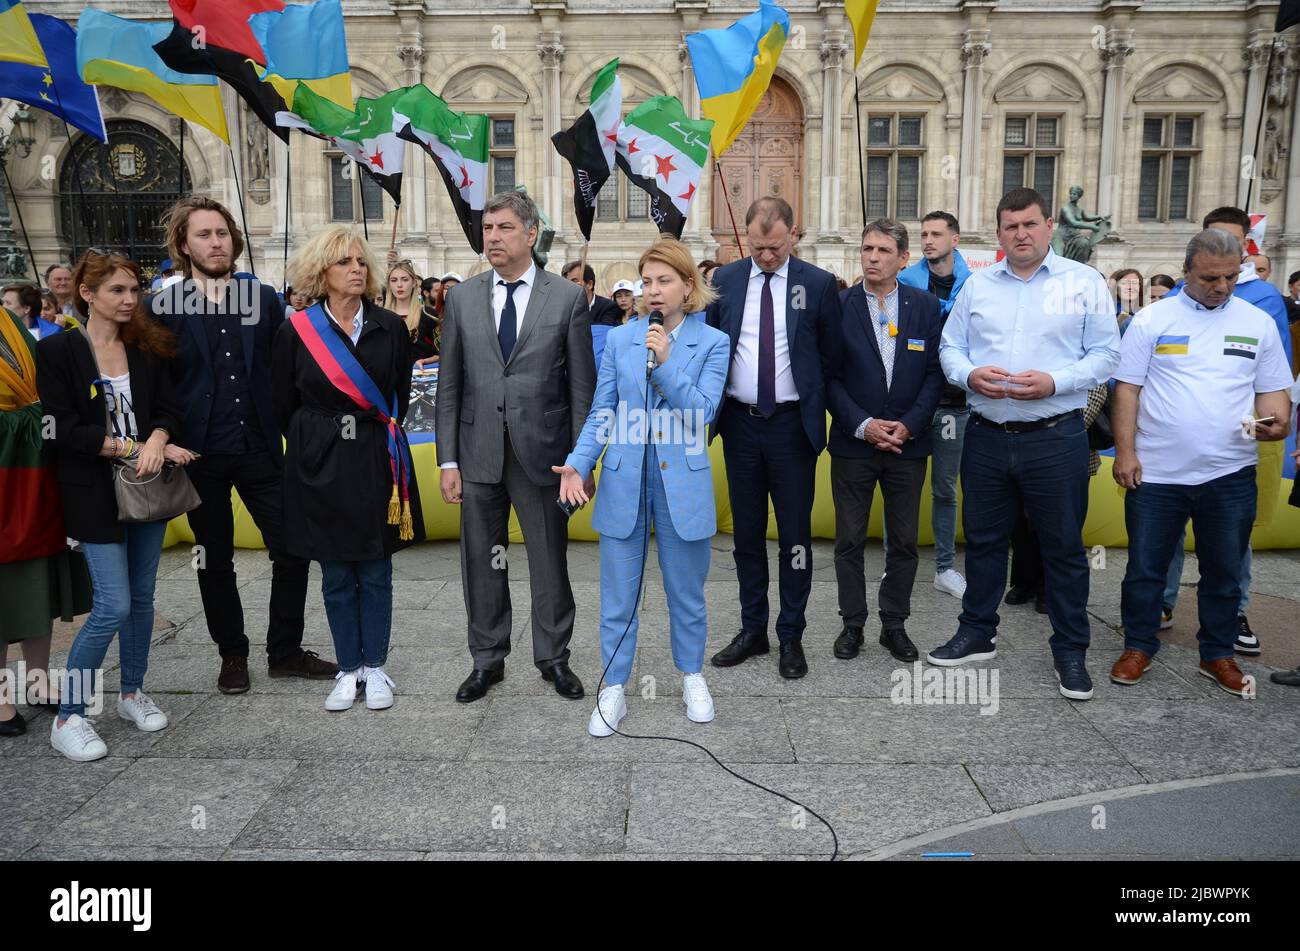 Deputy Prime Minister Olha Stefanishyna appears with the Ukrainian ambassador at a rally in support of the Ukrainians in front of the Paris City Hall Stock Photo